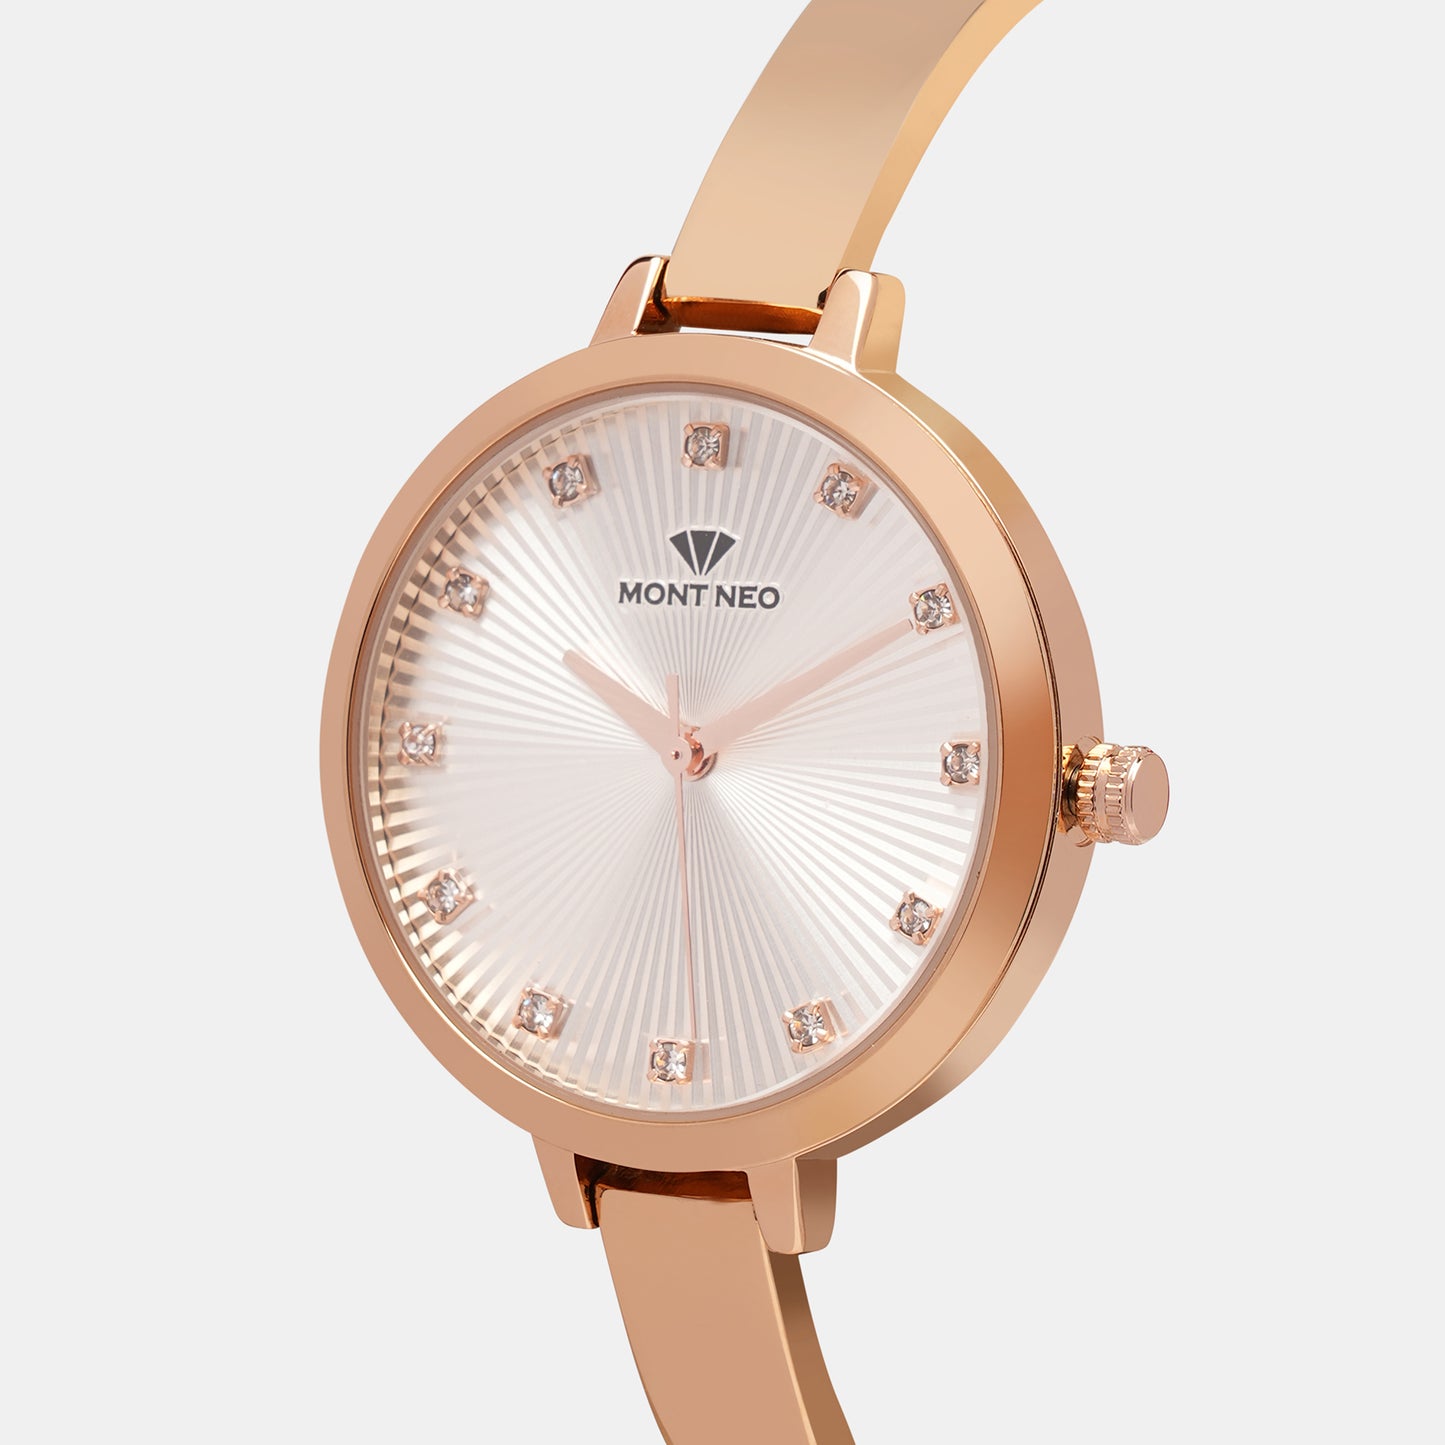 Timeless Rose Gold Analog Female Stainless Steel Watch 9004T-M3303